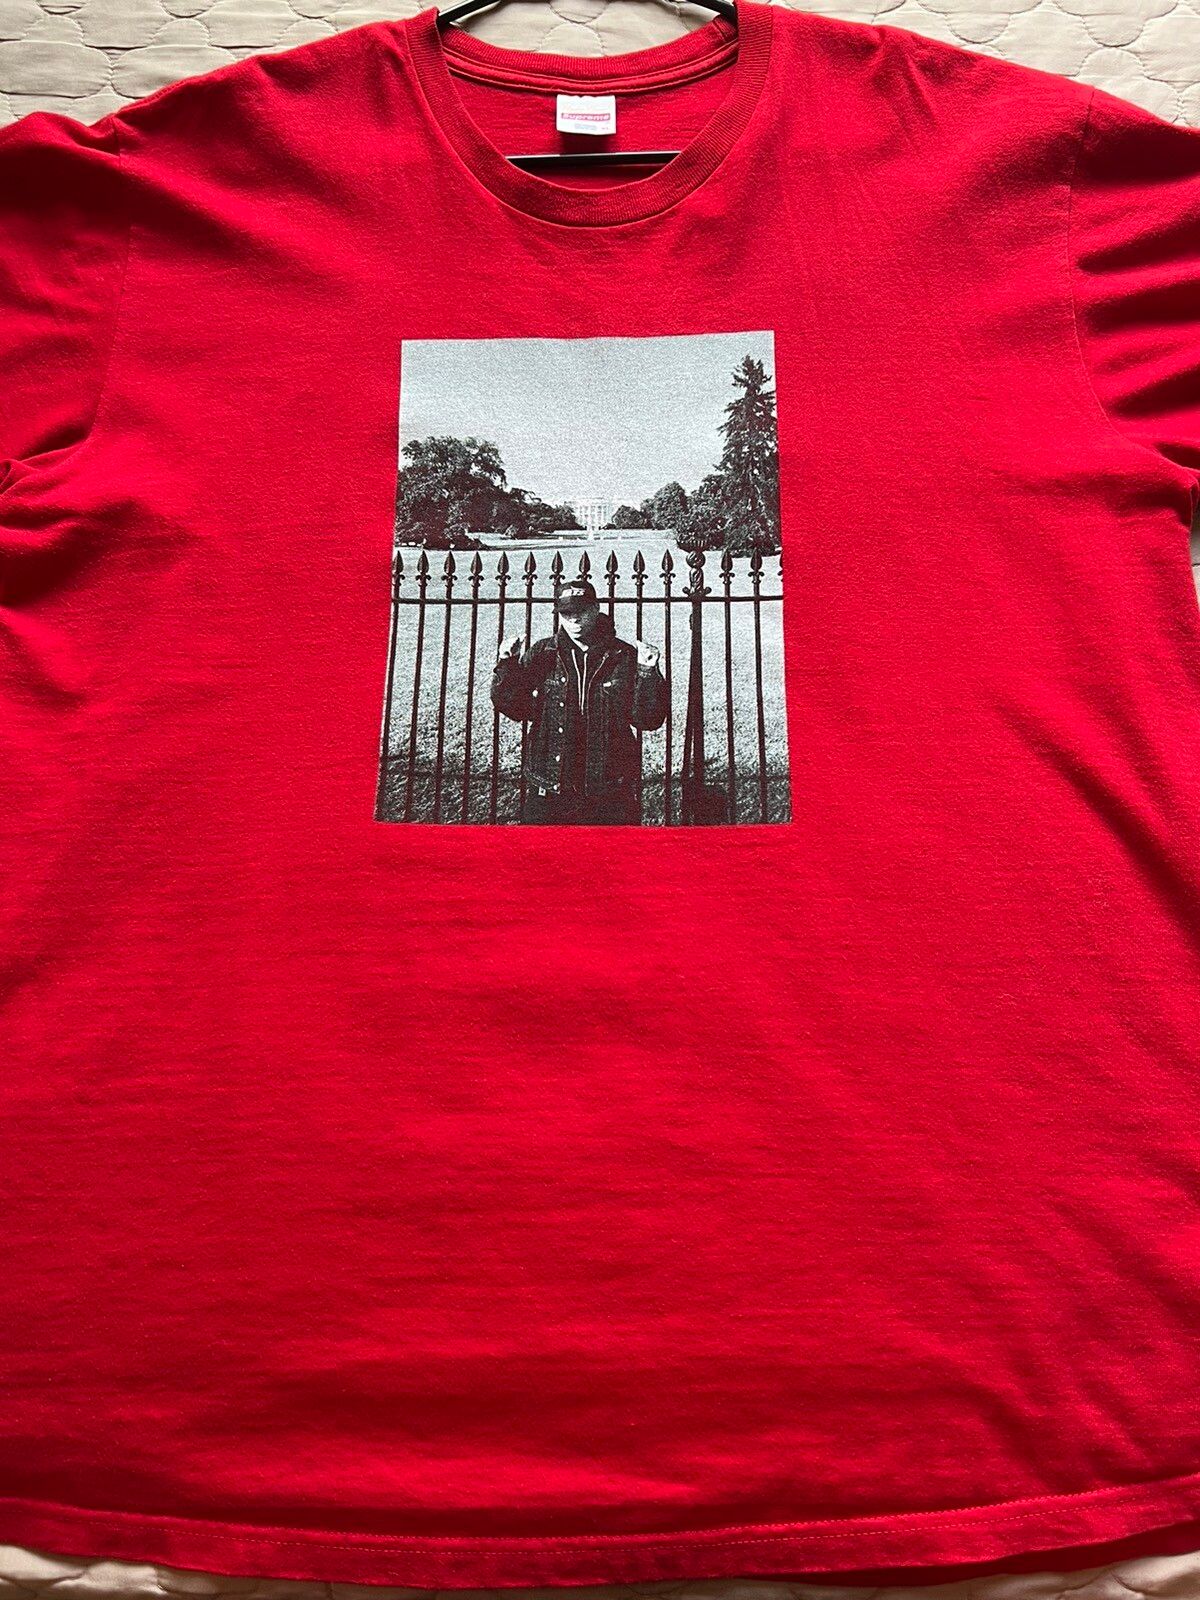 Supreme Undercover Public Enemy Tee | Grailed